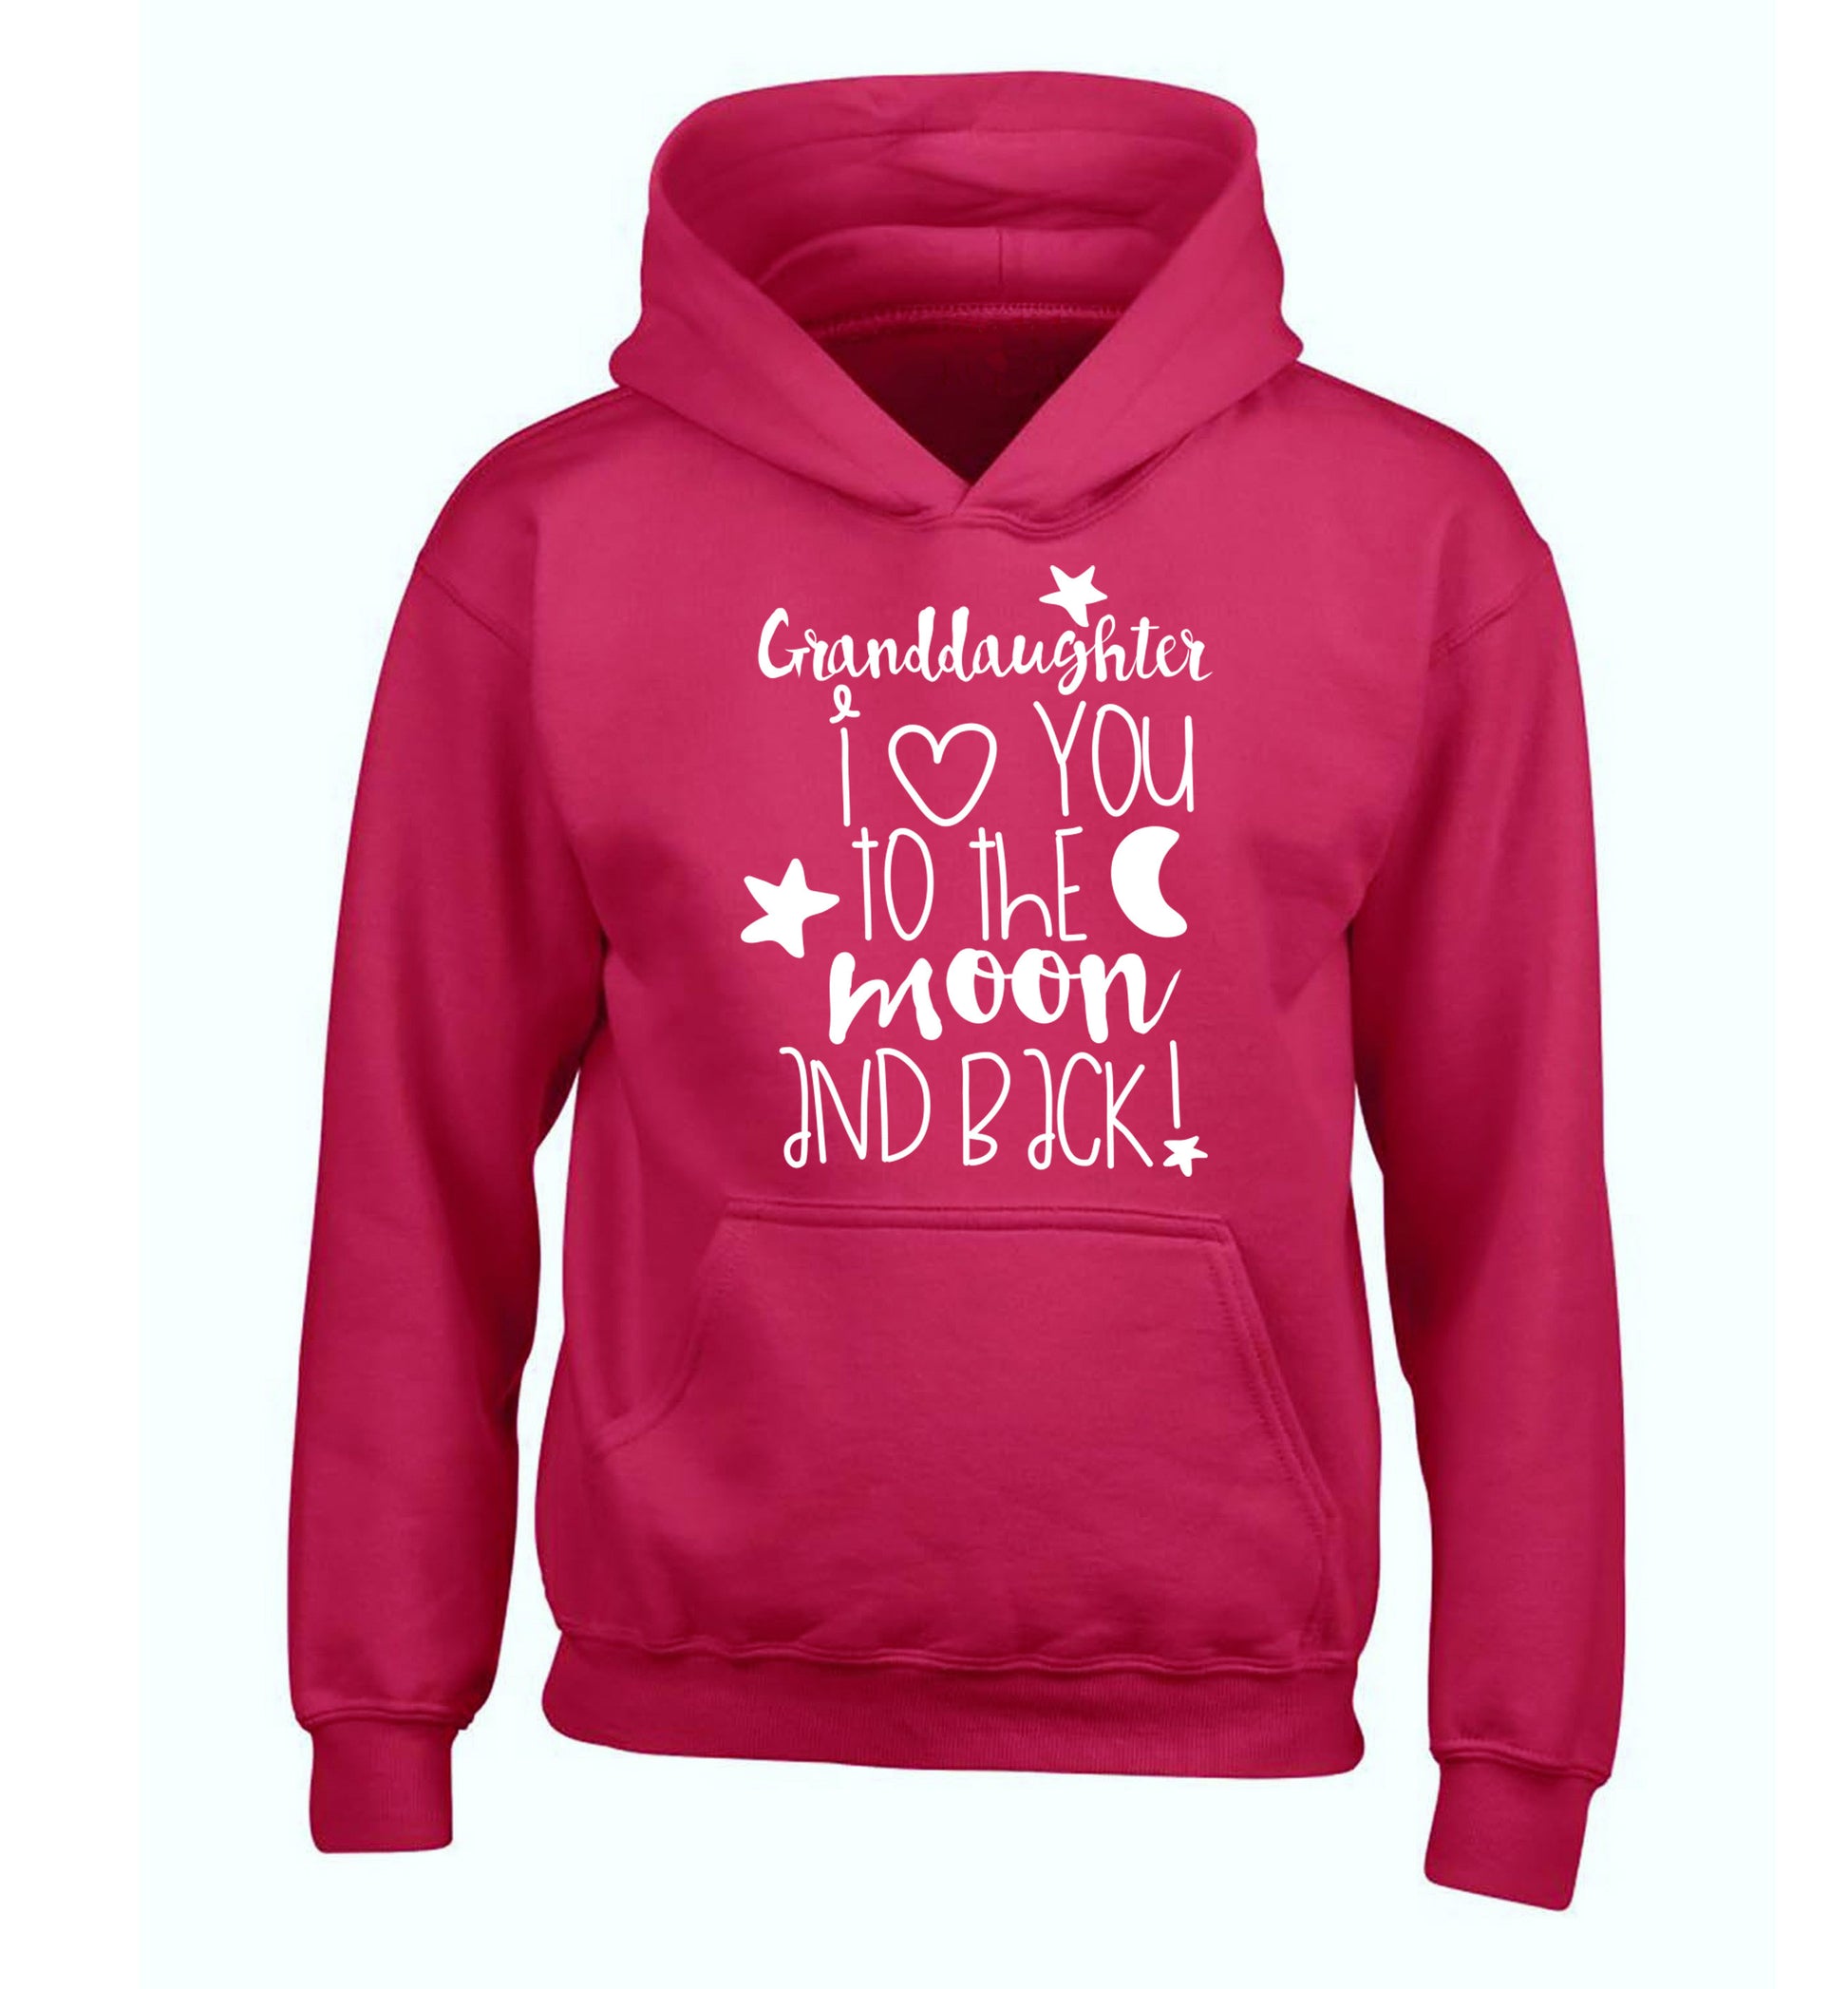 Granddaughter I love you to the moon and back children's pink hoodie 12-14 Years